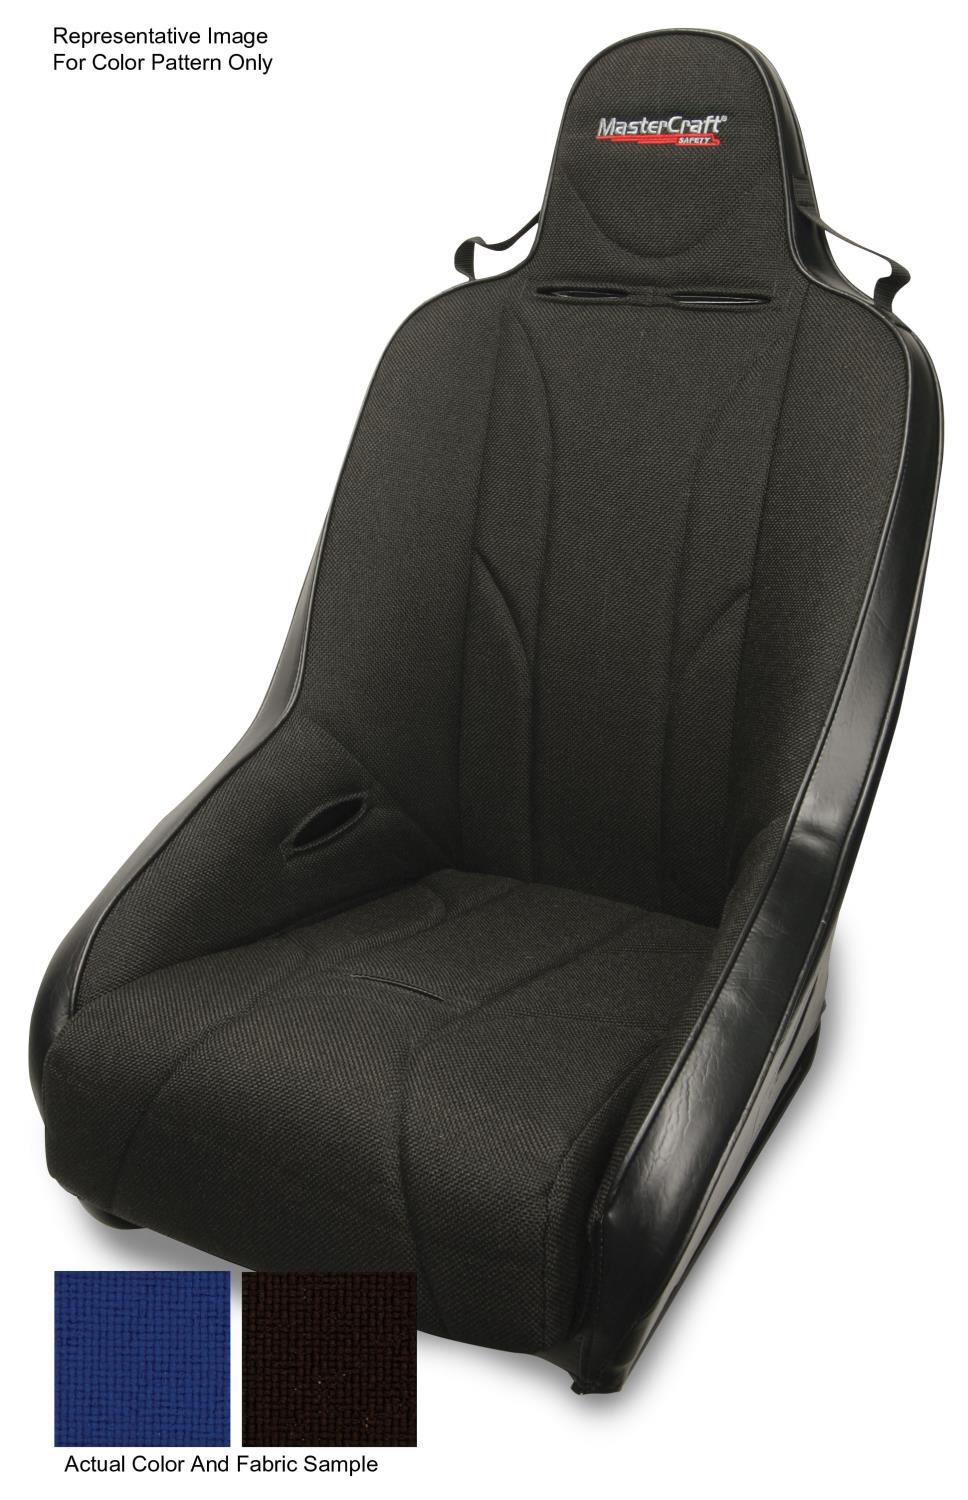 561013 Standard PROSeat w/Fixed Headrest, Black with Black Fabric Removable Cushion, Blue Side Panels, Black Band w/BRS Stitch